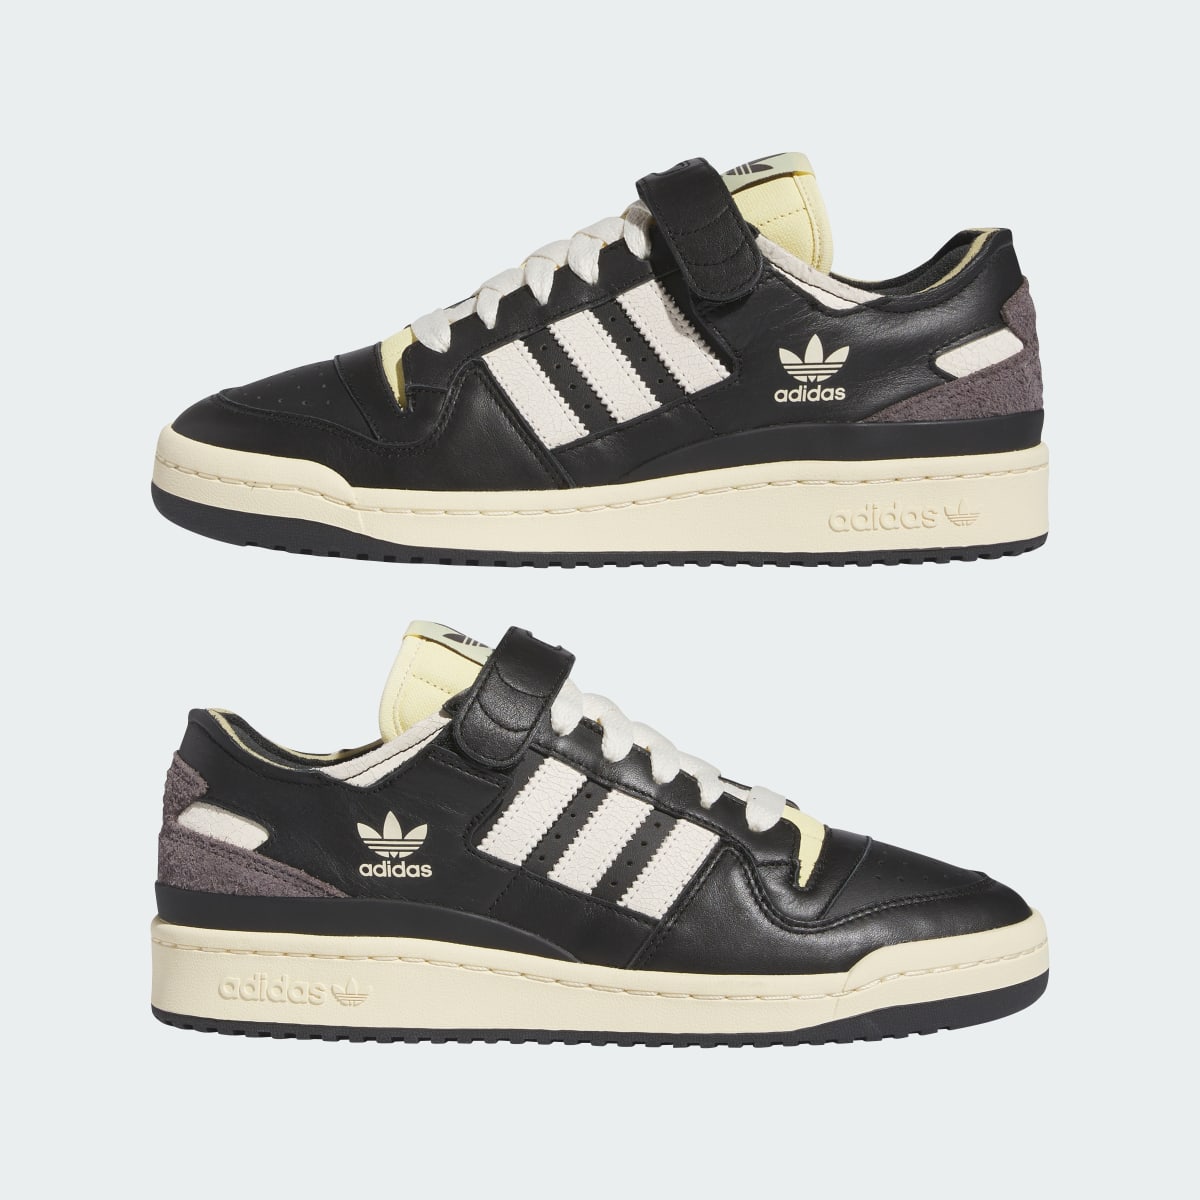 Adidas Forum 84 Low Shoes. 8